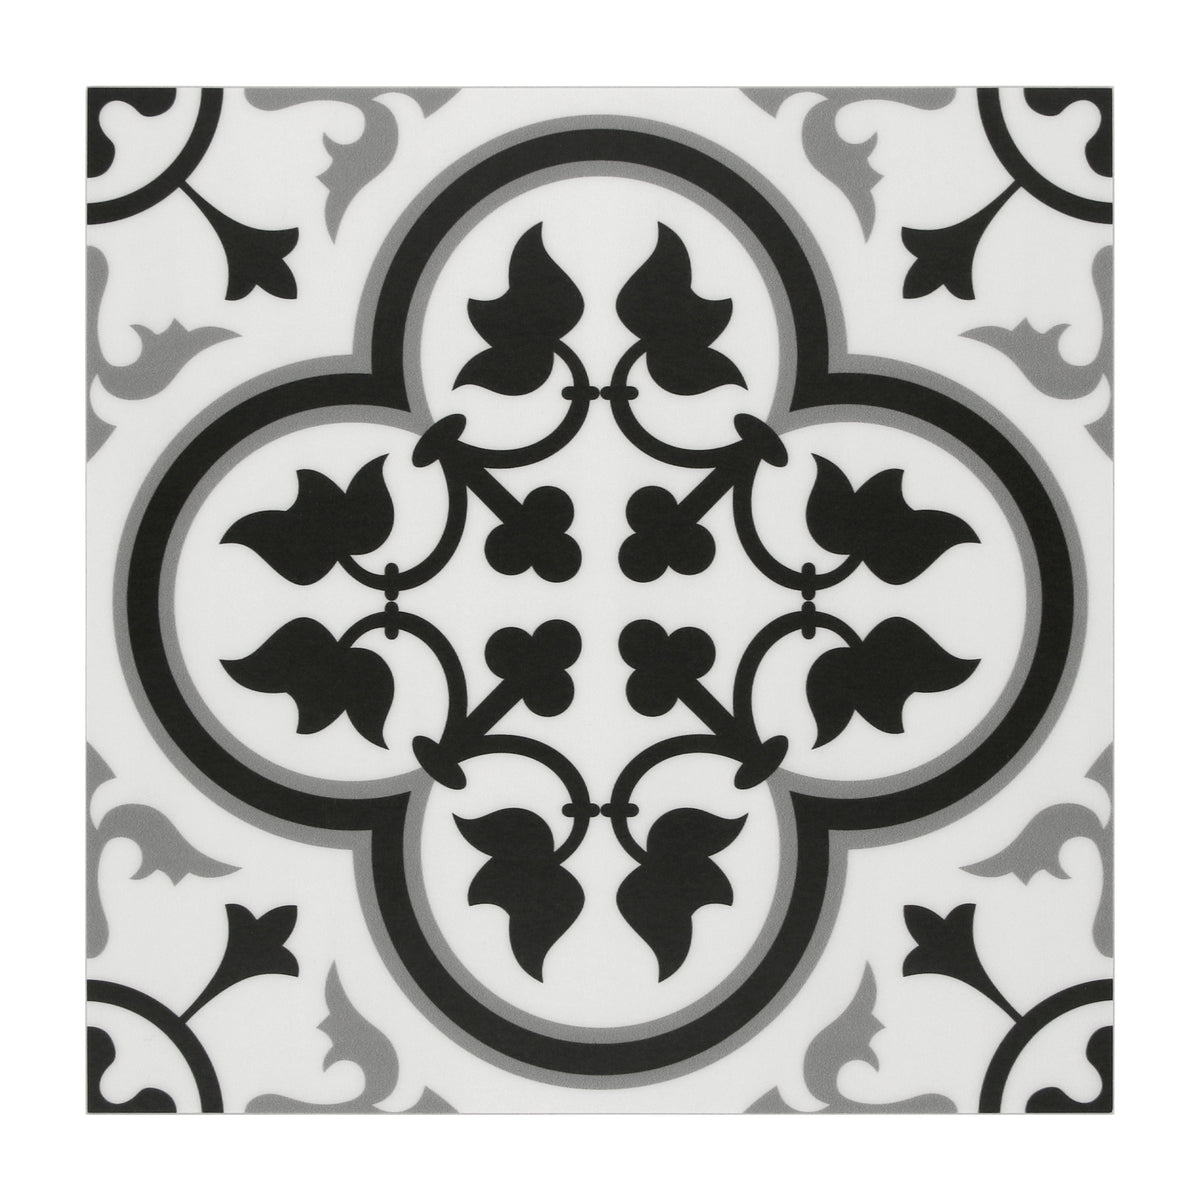 9" x 9" Patterned Black and White Peel and Stick Backsplash Wall and Floor Tile